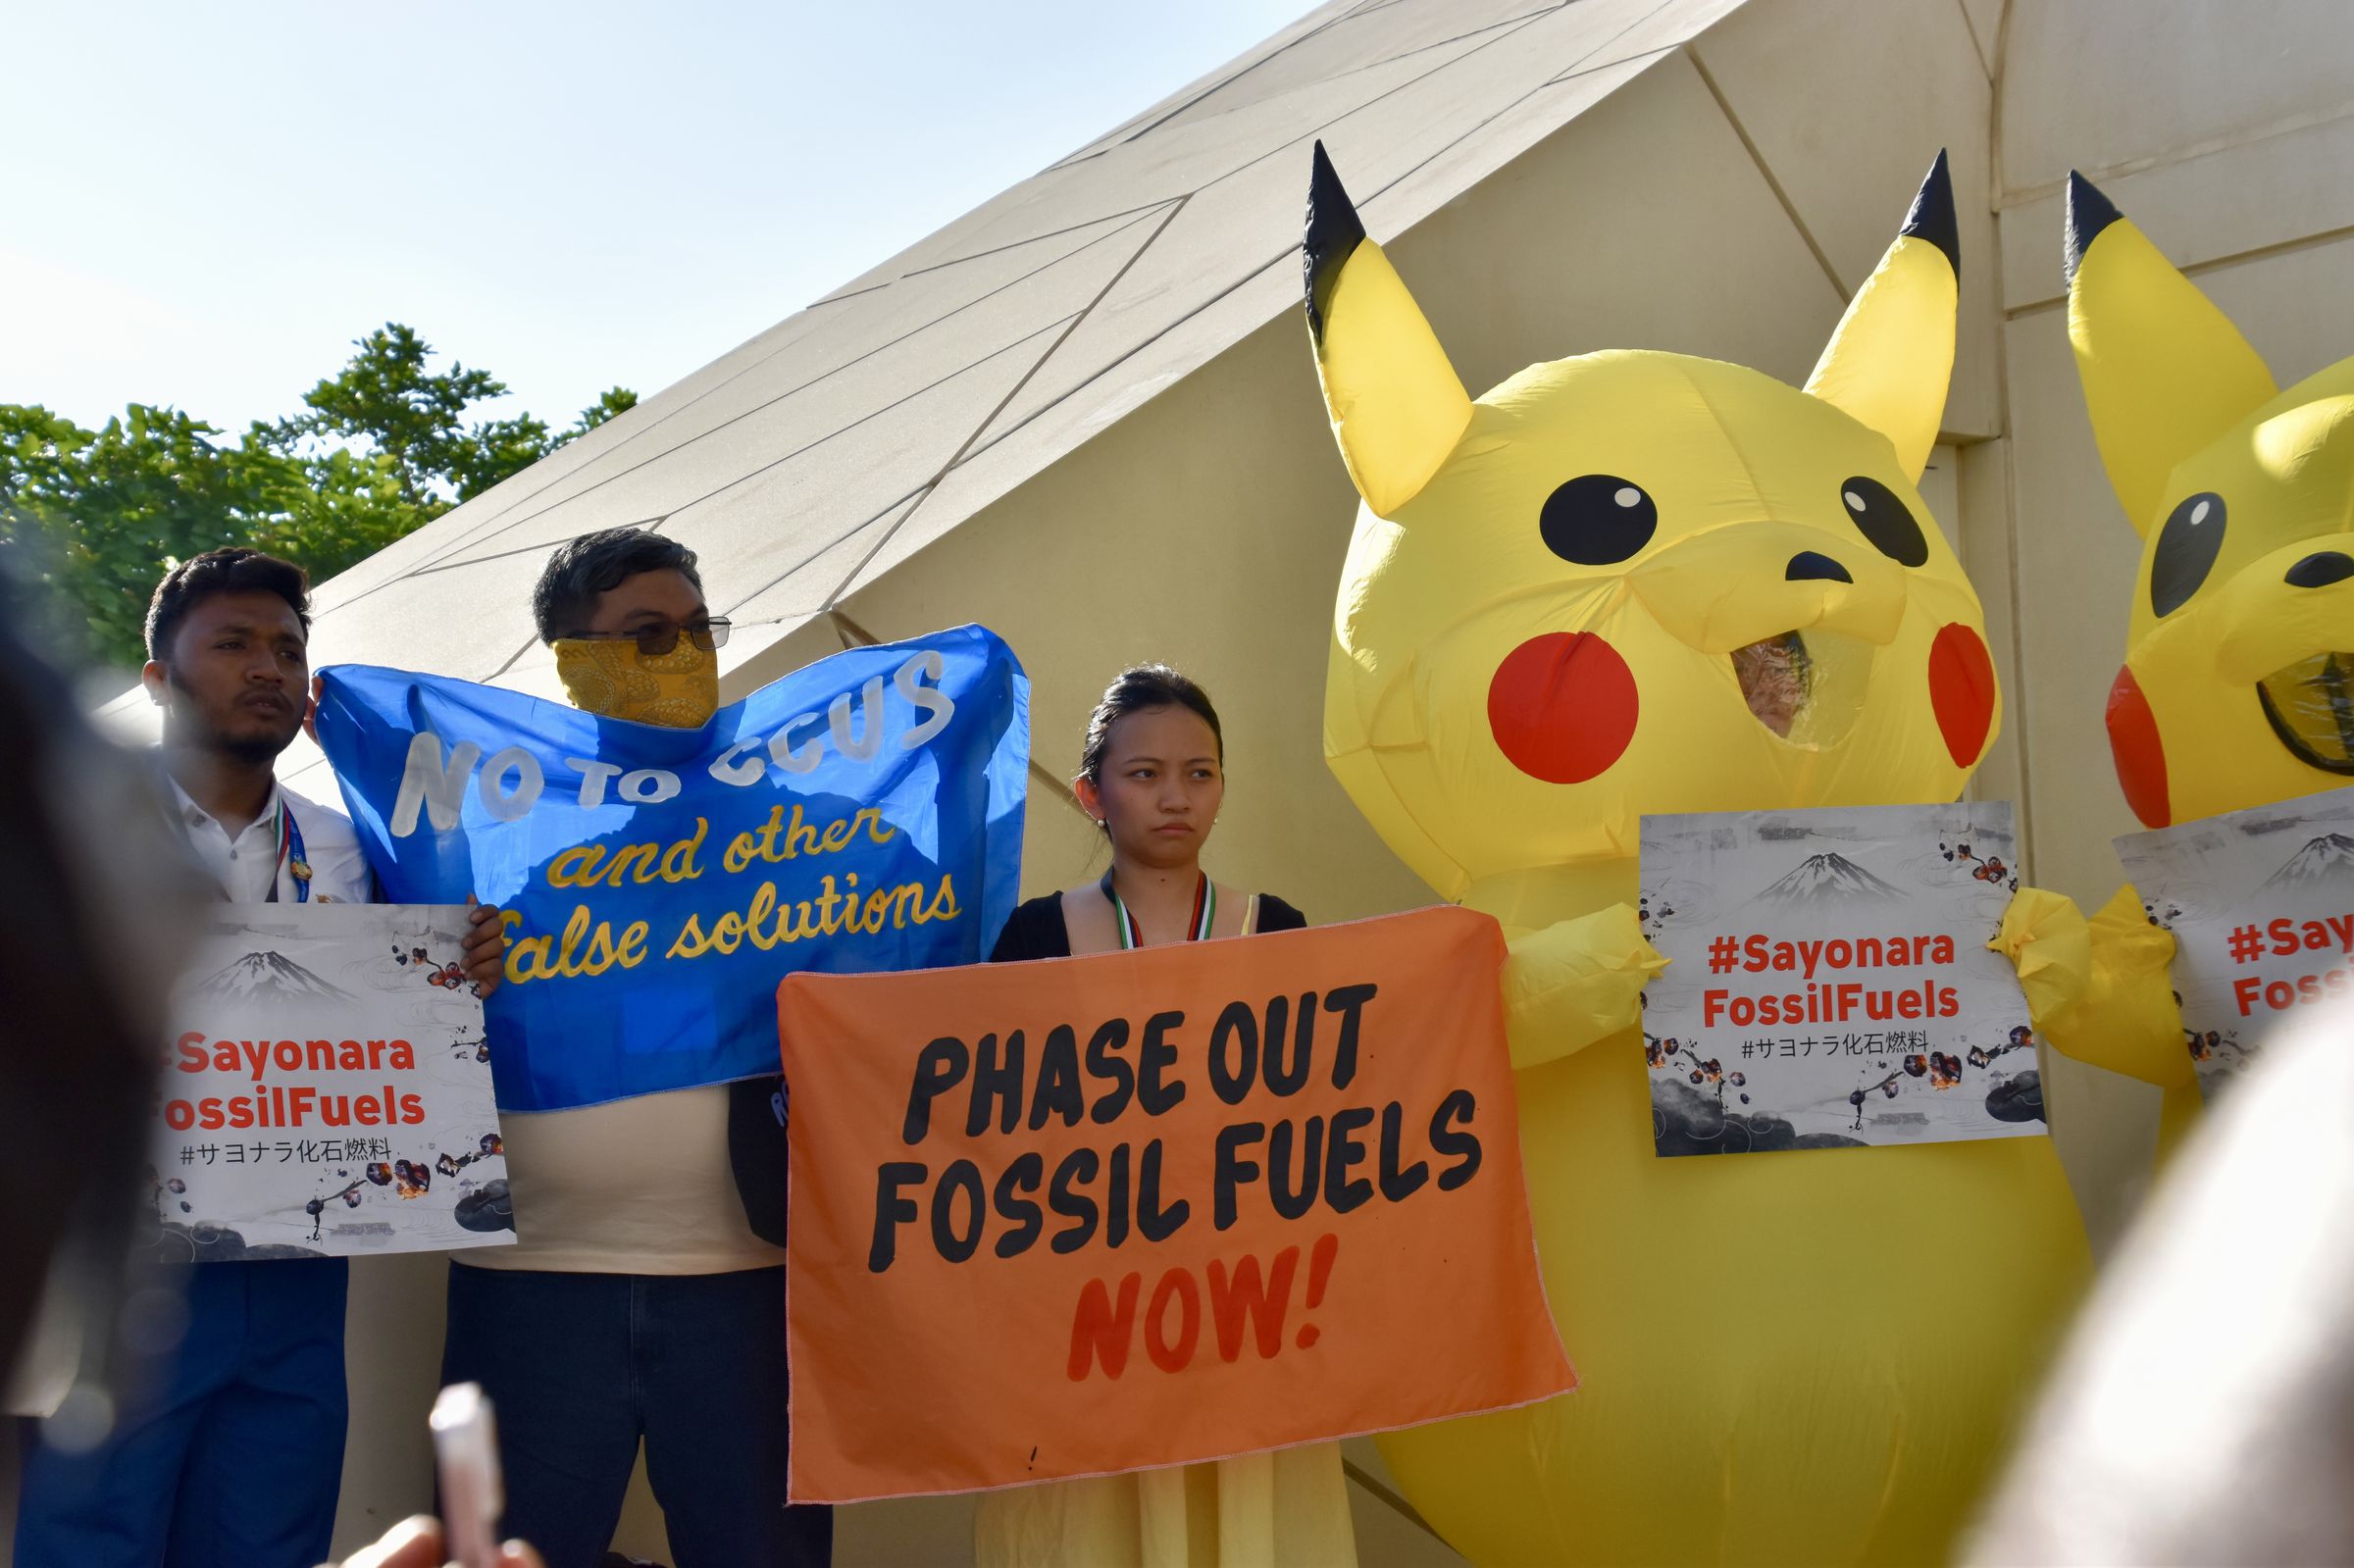 Two people wearing inflatable Pikachu costumes stand side by side holding signs that say“#Sayonara FossilFuels”. They stand next to other demonstrators holding banners that say “phase out fossil fuels now!” and “No to CCUS and other false solutions”.